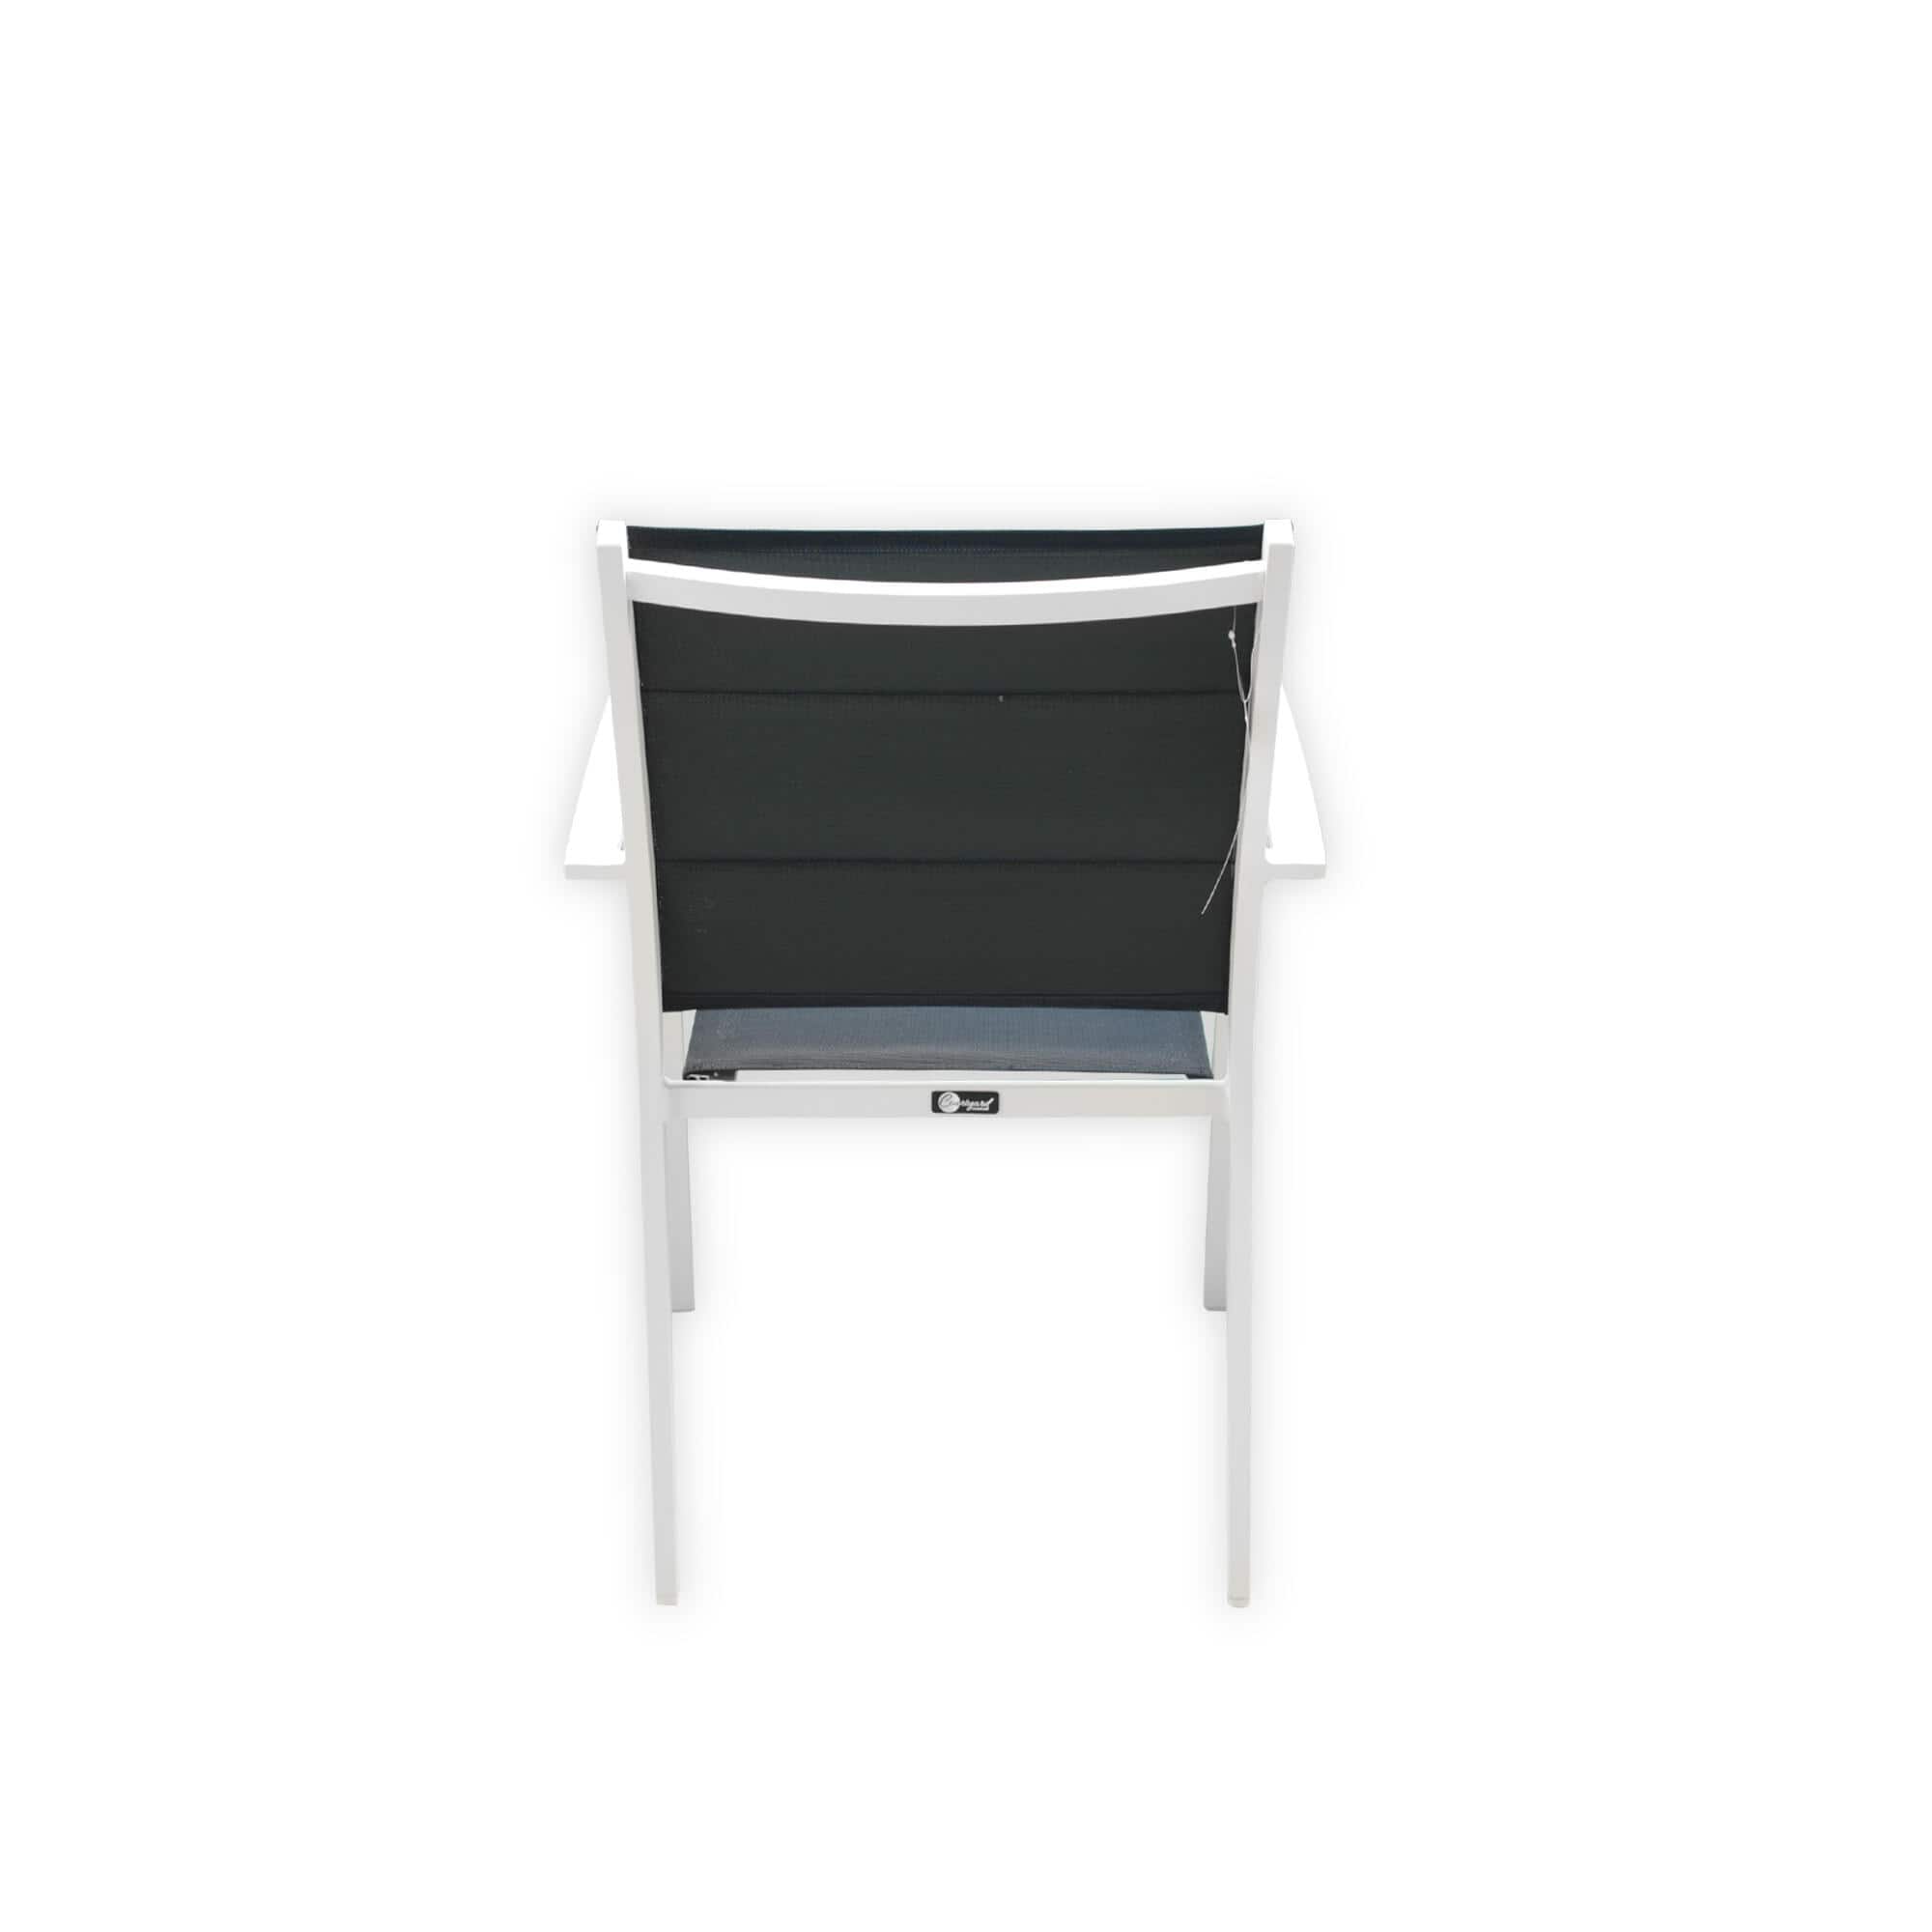 Courtyard Casual Outdoor Dining Chair Courtyard Casual -  Skyline White Aluminum Outdoor Dining Chair, 6 pc Set | 5079